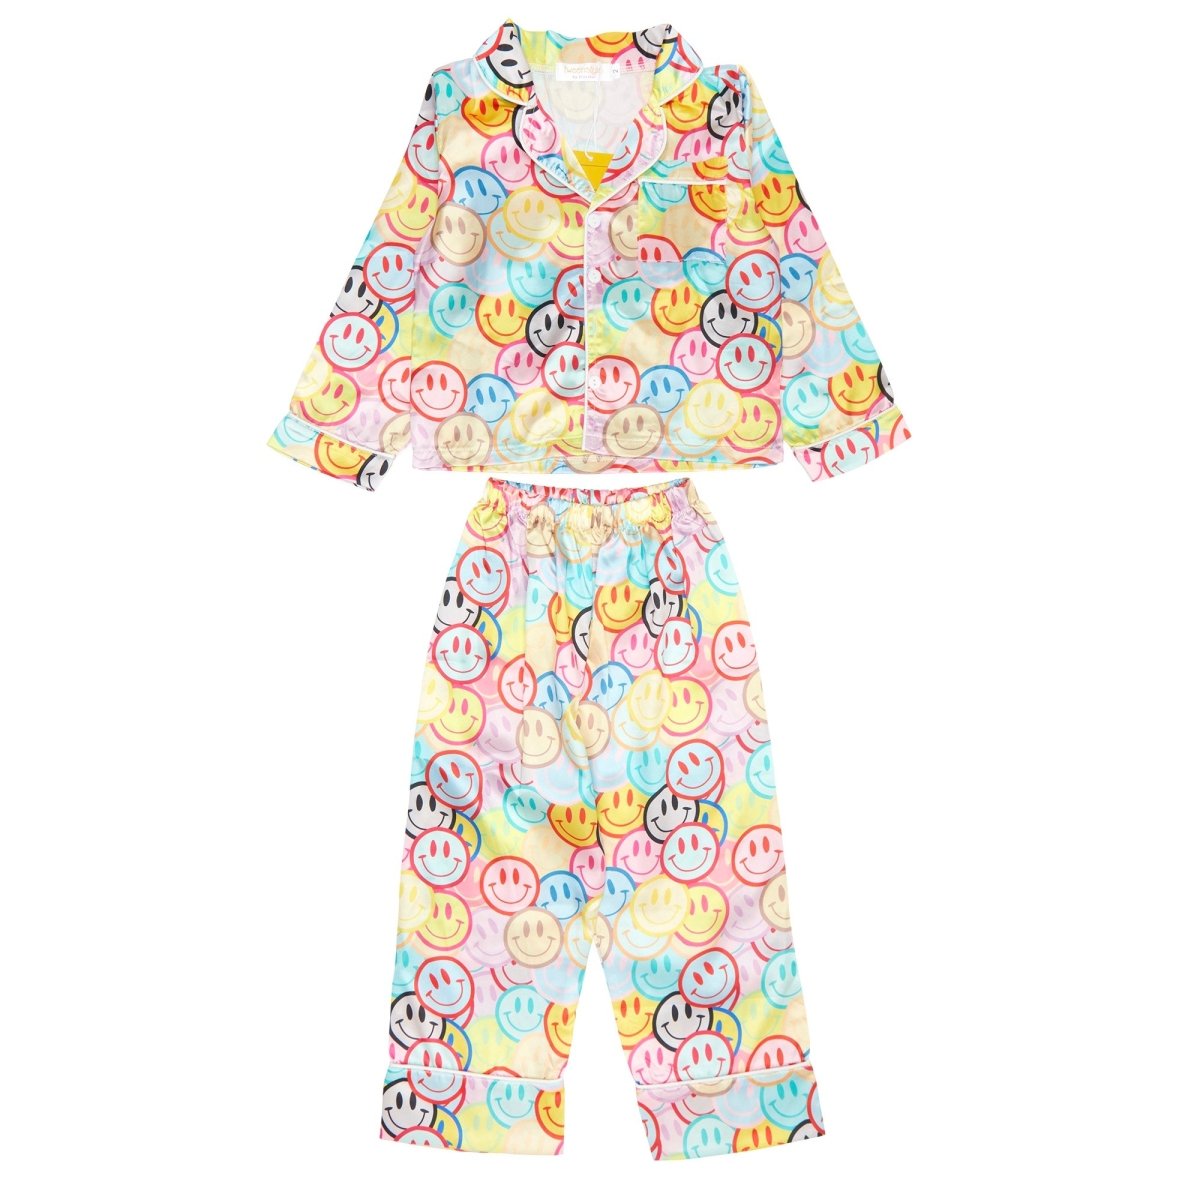 SMILEY TWO PIECE PAJAMAS - SPARKLE BY STOOPHER